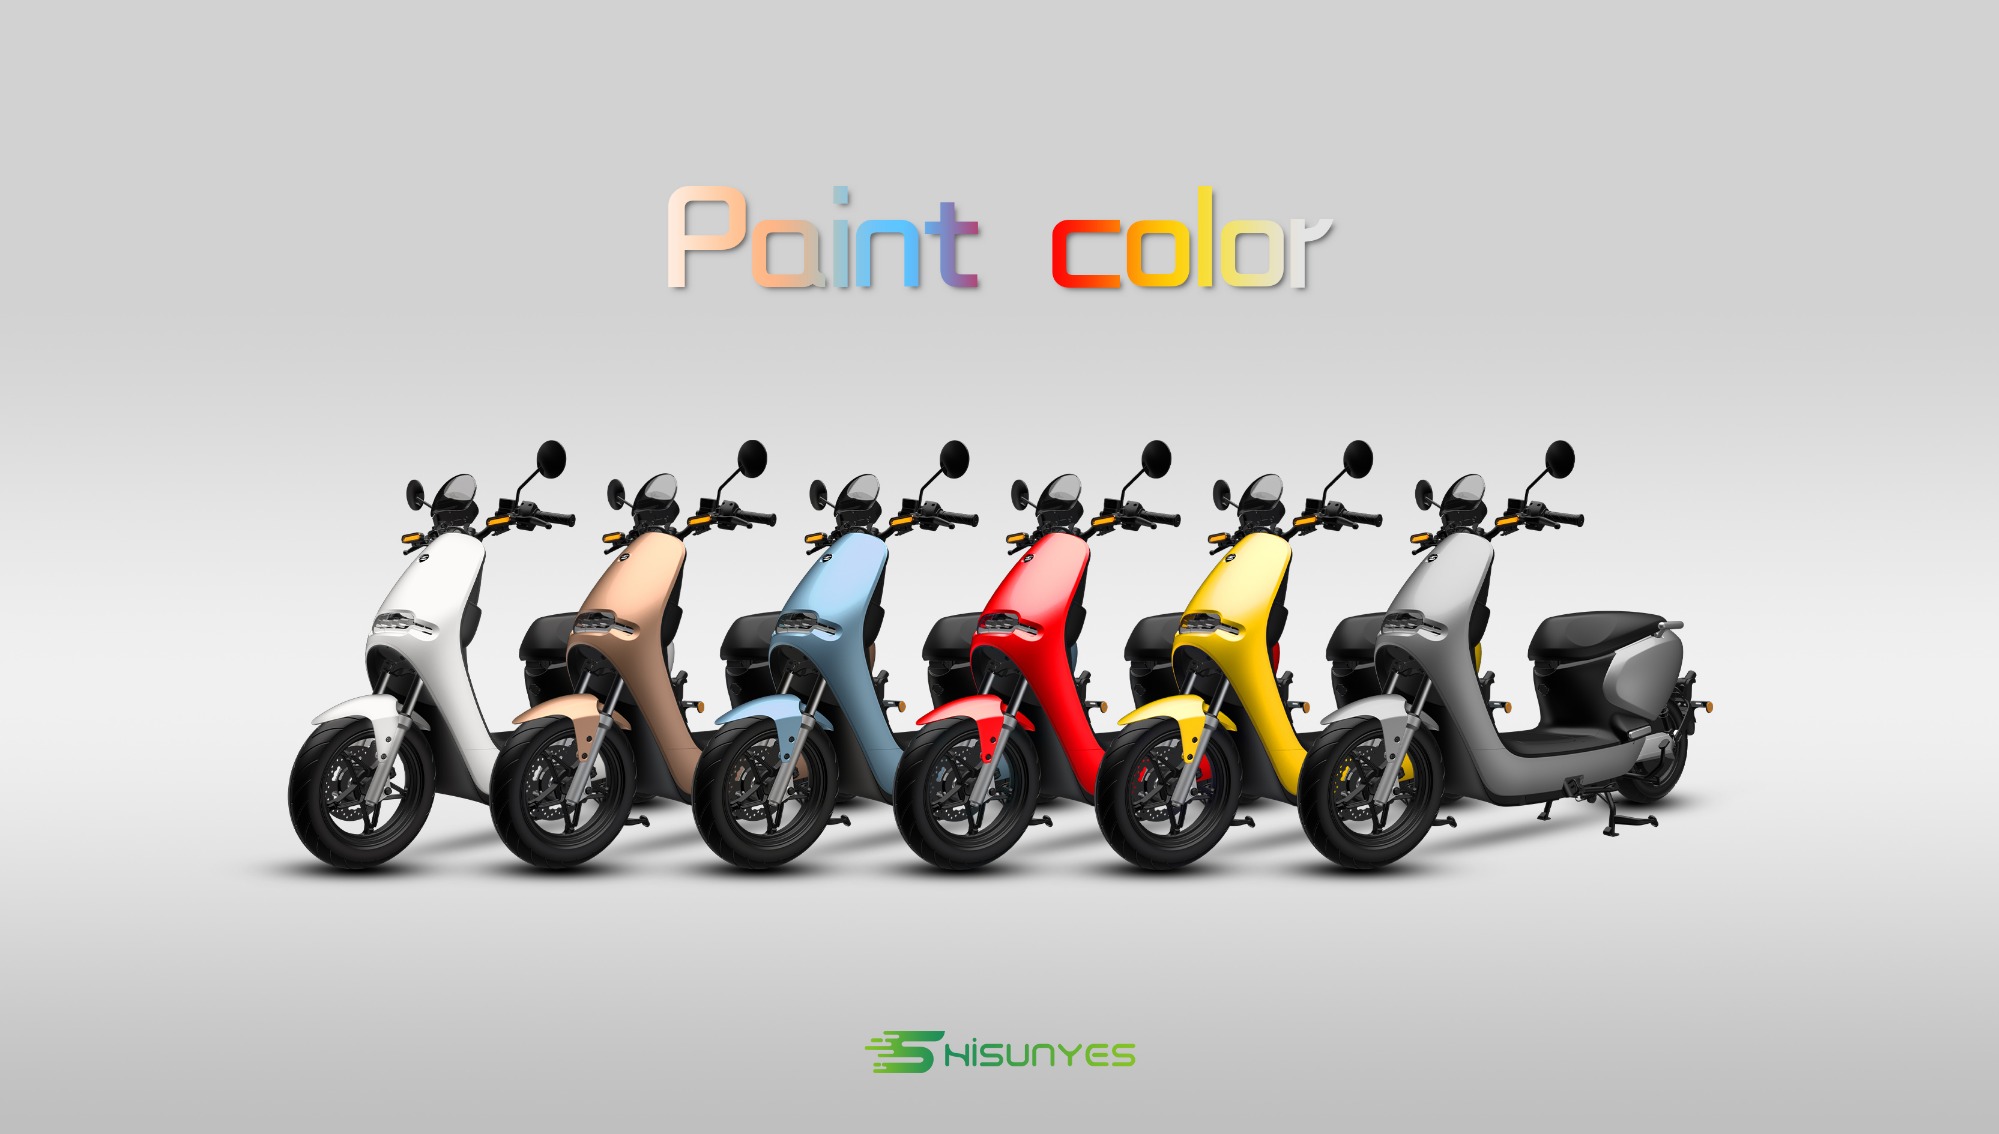 New electric scooter has many colors